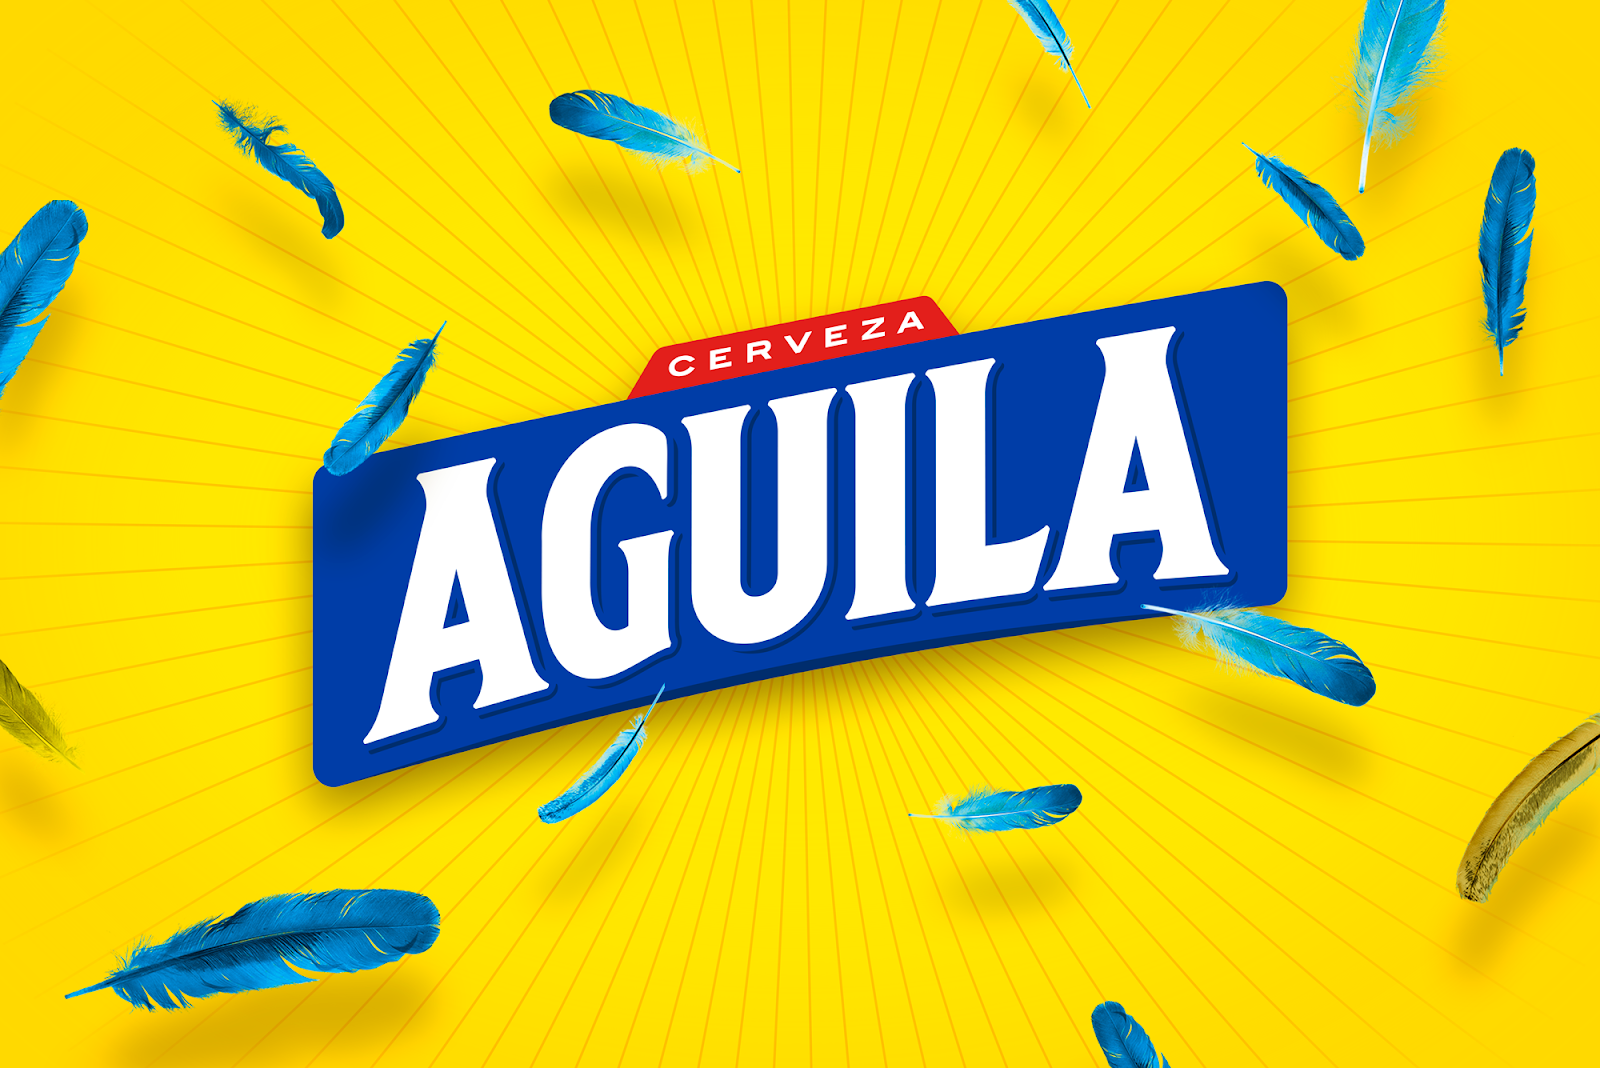 Aguila Beer Redesign